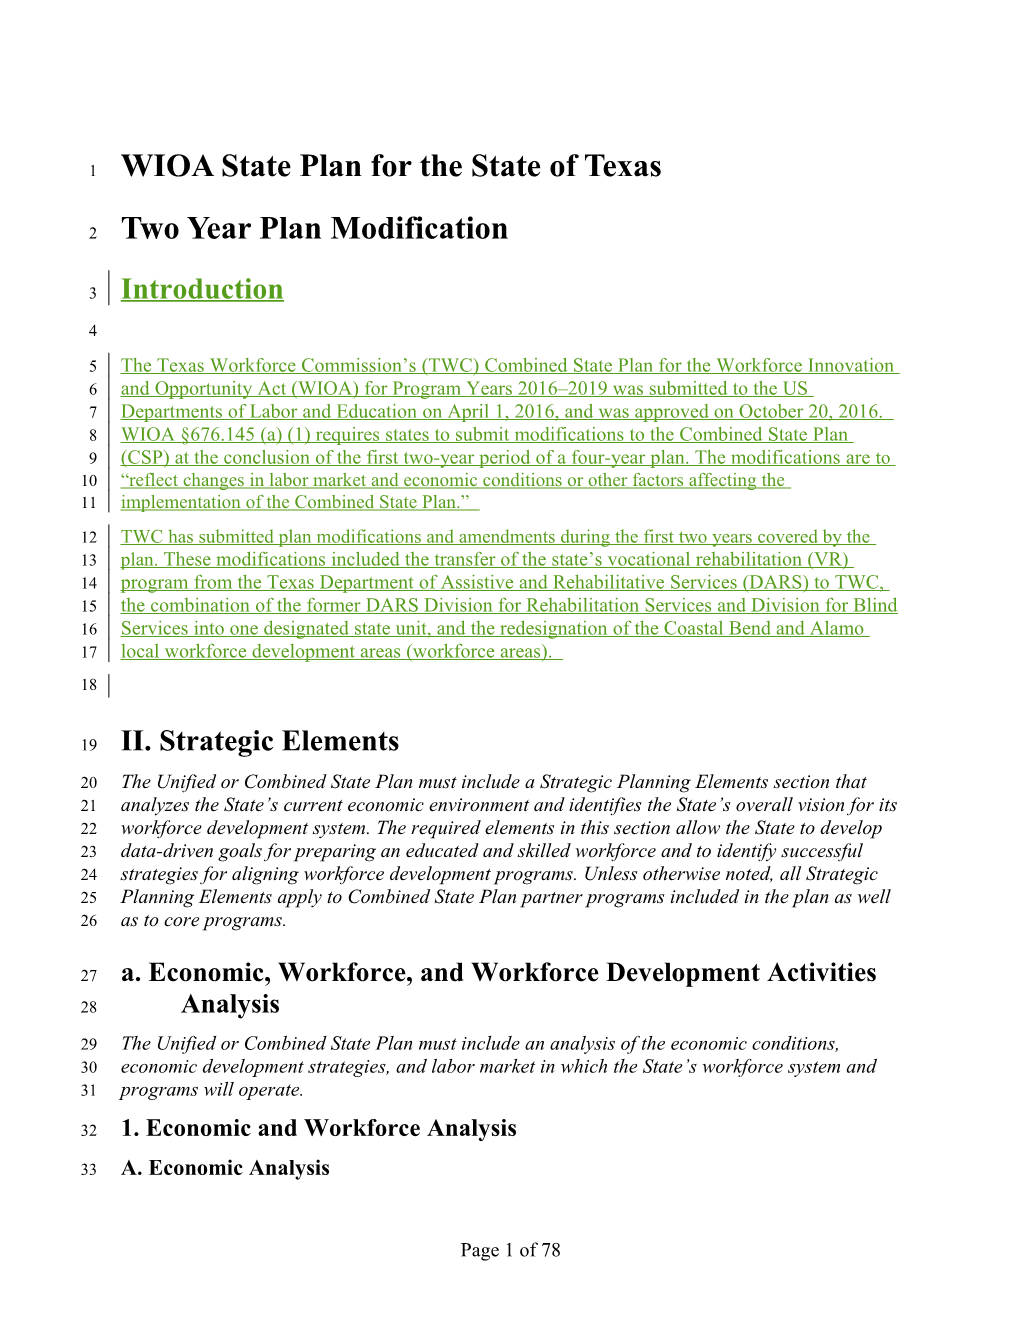 WIOA State Plan for the State of Texas